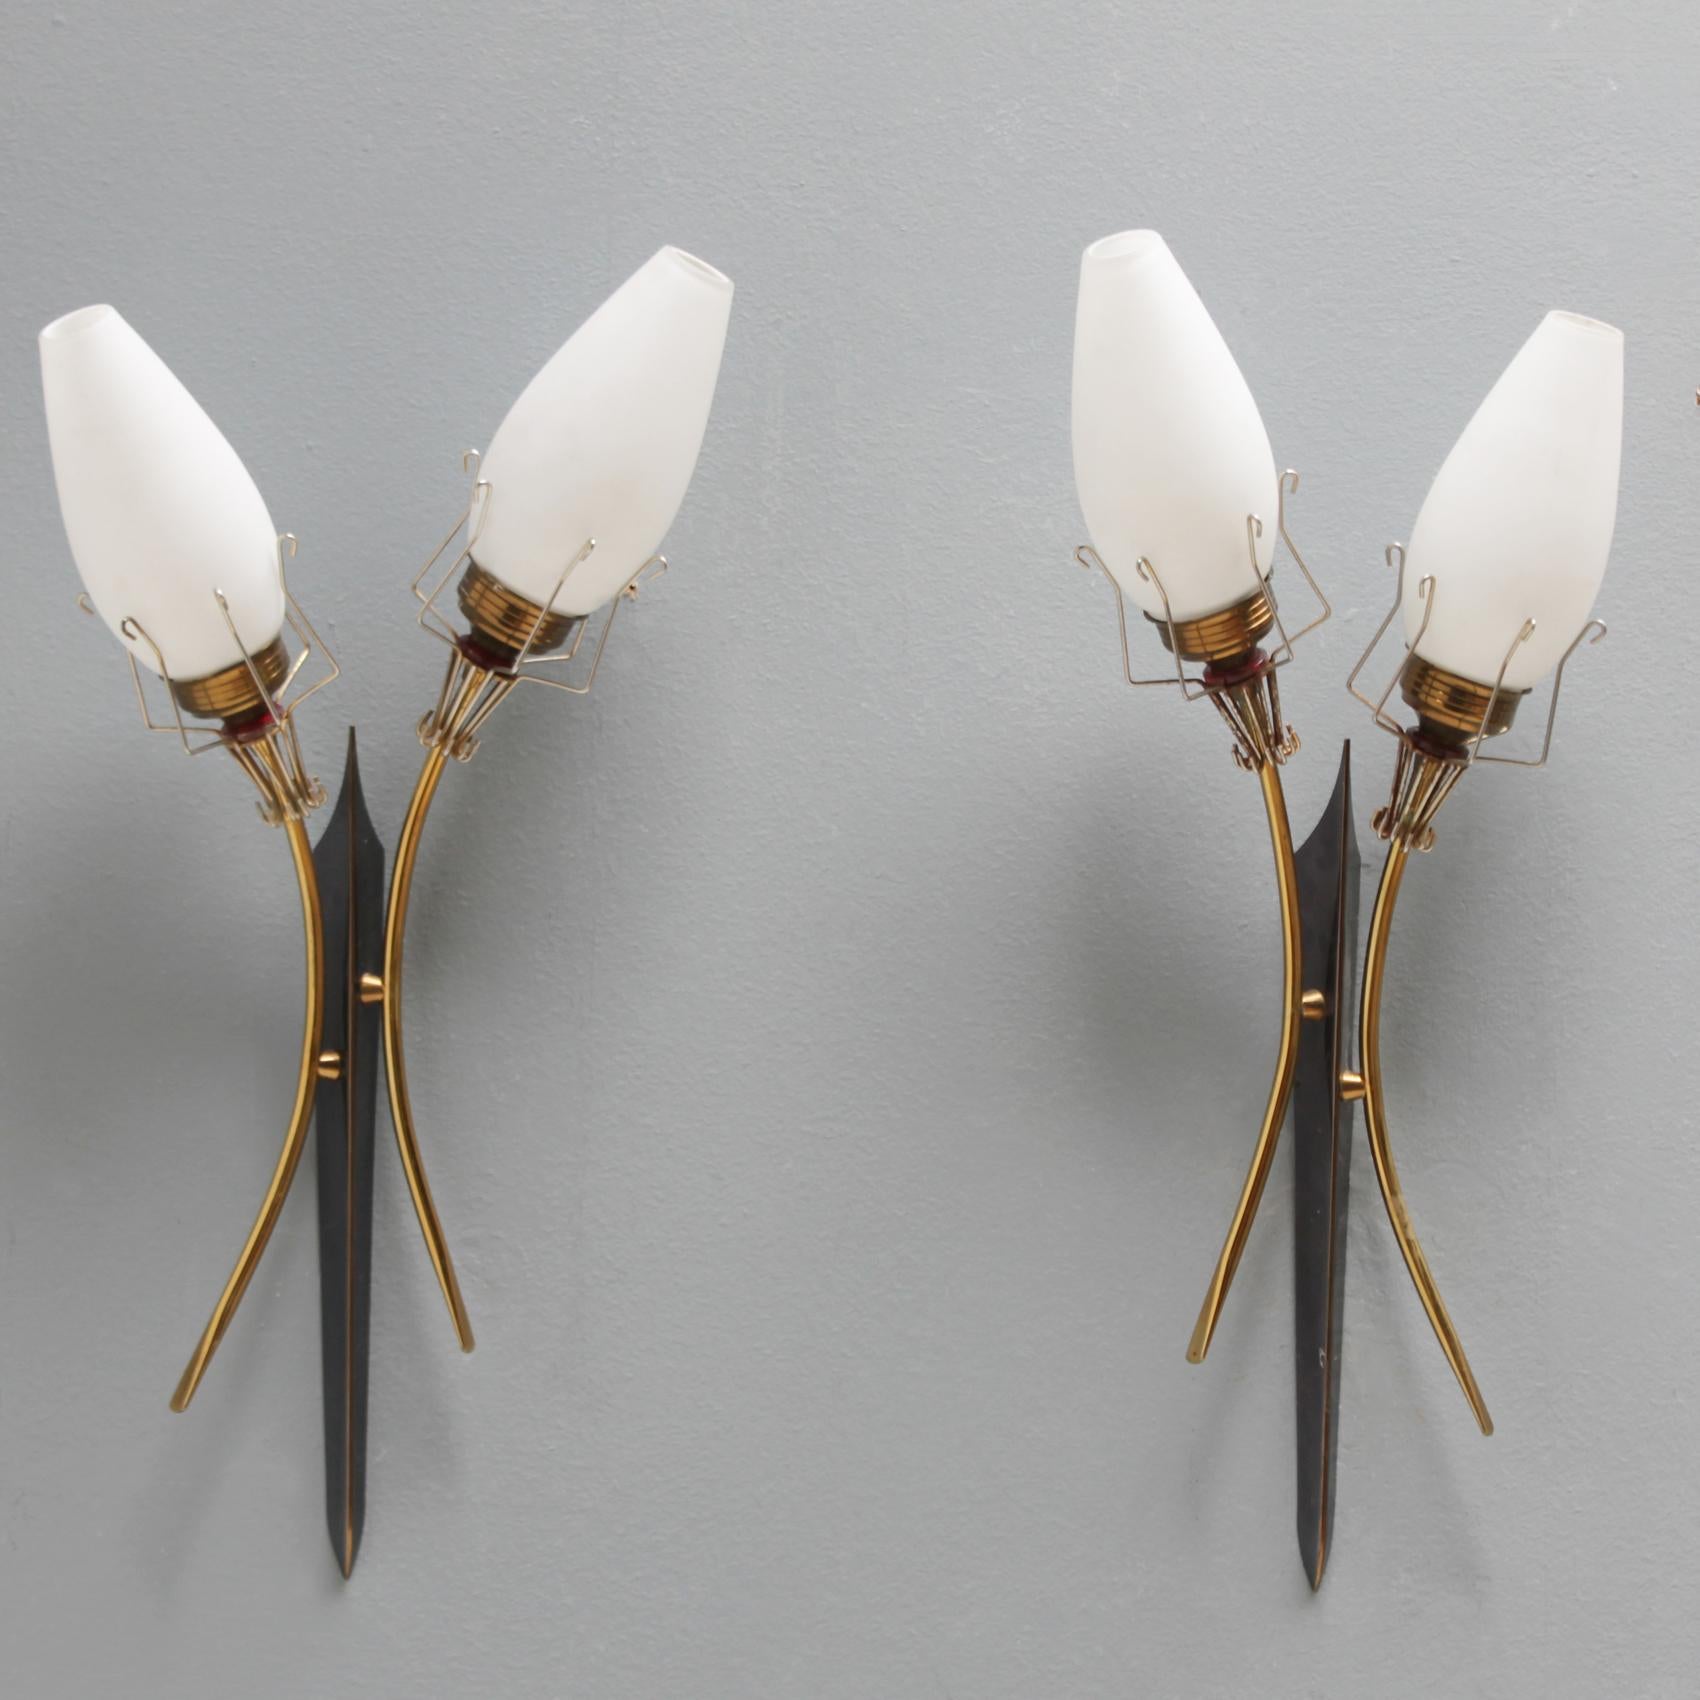 Pair of elegant French torches attributed by Maison Arlus. Wall lights with opaline glass shades and beautiful brass details. Each light has two bayonet bulbs (BA15d, IEC 7004-11 A, DIN 49720).
Dimensions: height 21.3 in. (54 cm), depth 5.9 in. (15